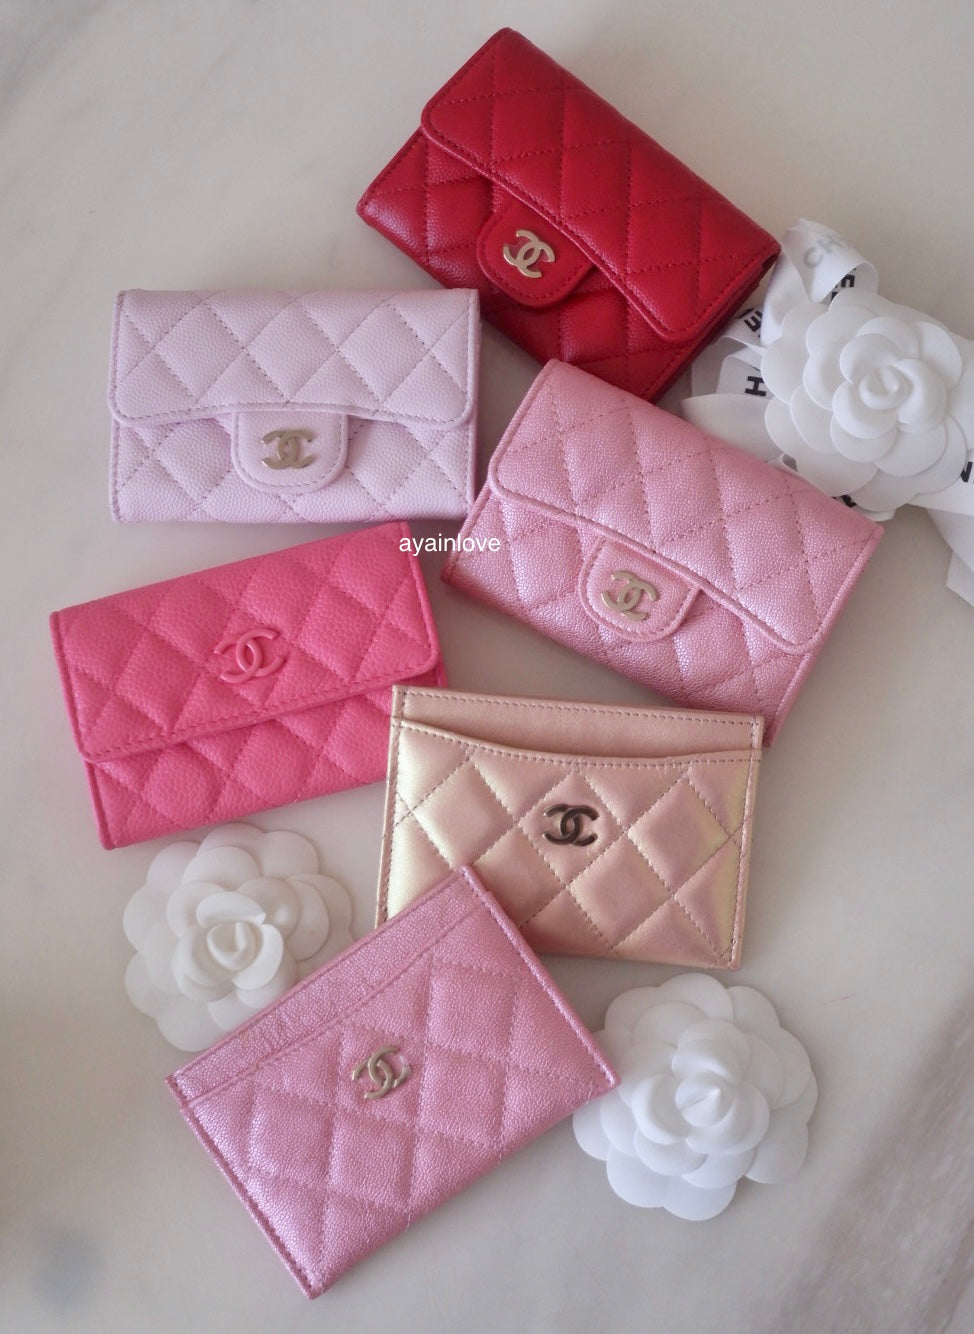 Chanel Classic Cardholder Review - Pros, Cons, and Is It Worth It? -  Isabelle Vita New York